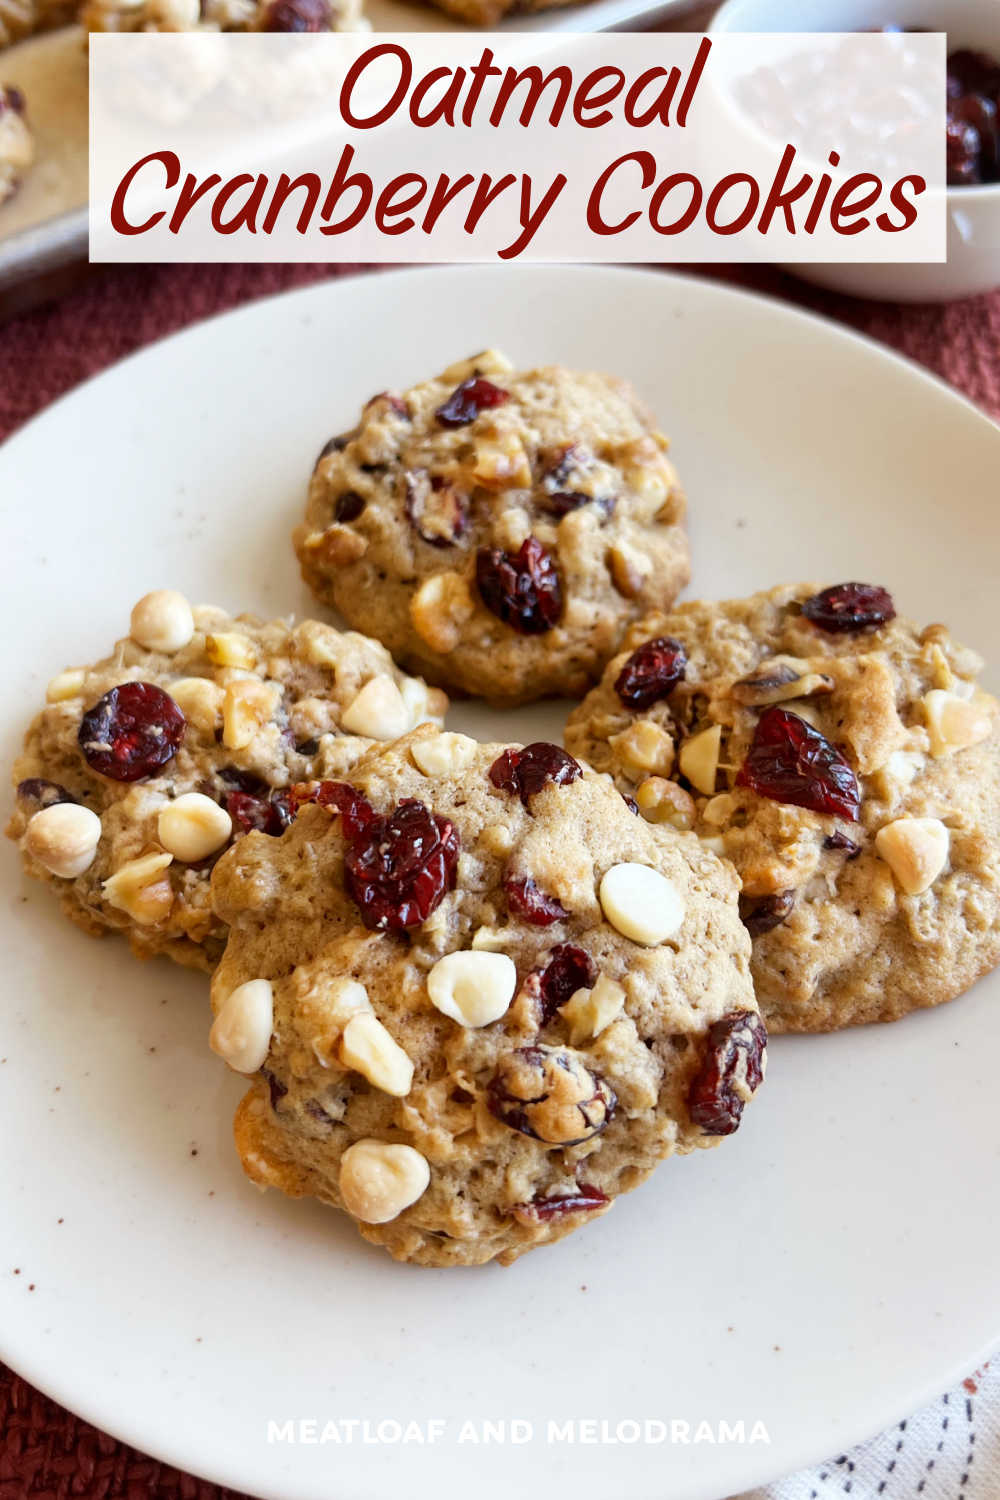 Oatmeal Cranberry Walnut Cookies are oatmeal cranberry cookies loaded with dried cranberries, chopped walnuts and white chocolate chips. These Craisin cookies are soft, chewy and perfect for fall! via @meamel